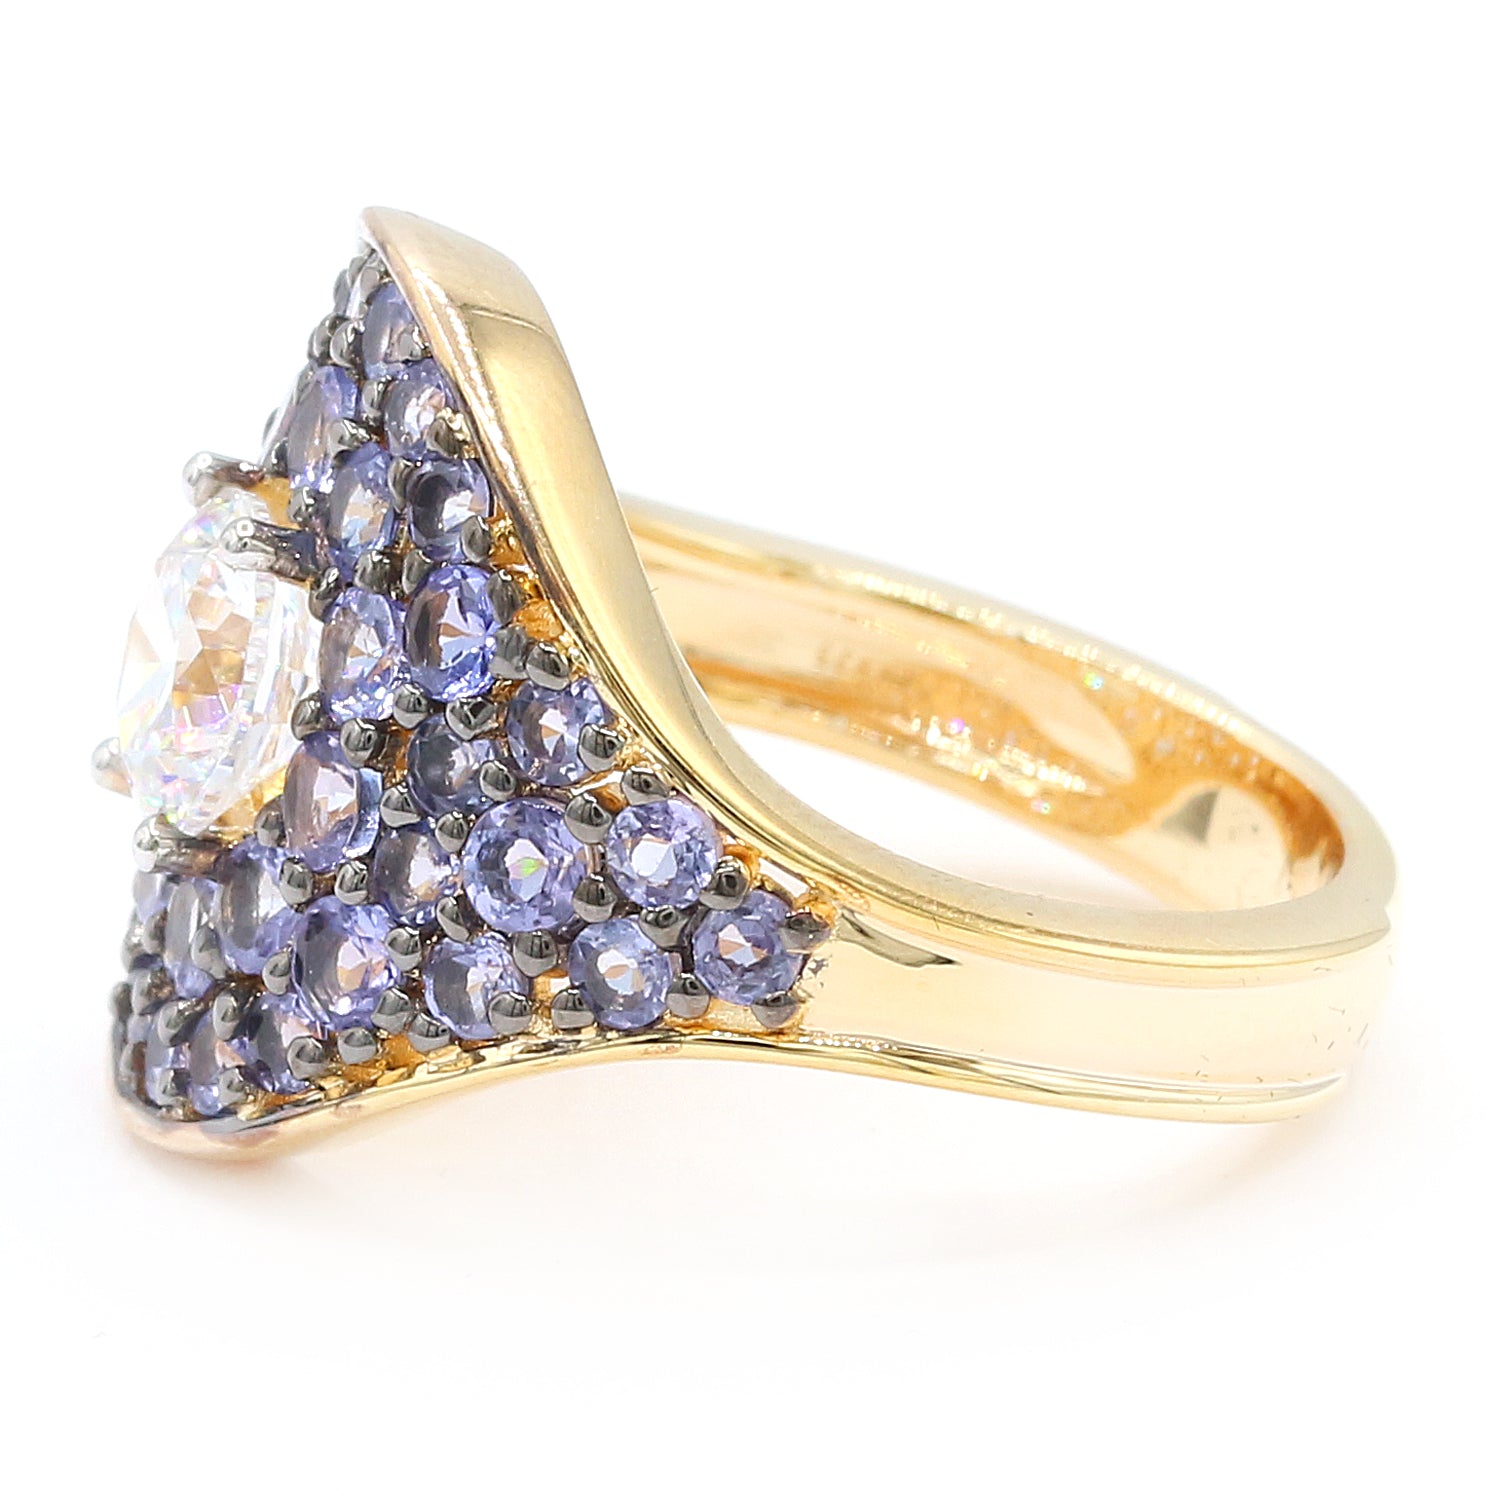 Limited Edition Gems en Vogue Luxe, One-of-a-kind IGI Certified Over 1ct Lab Grown Diamond & Tanzanite Ring